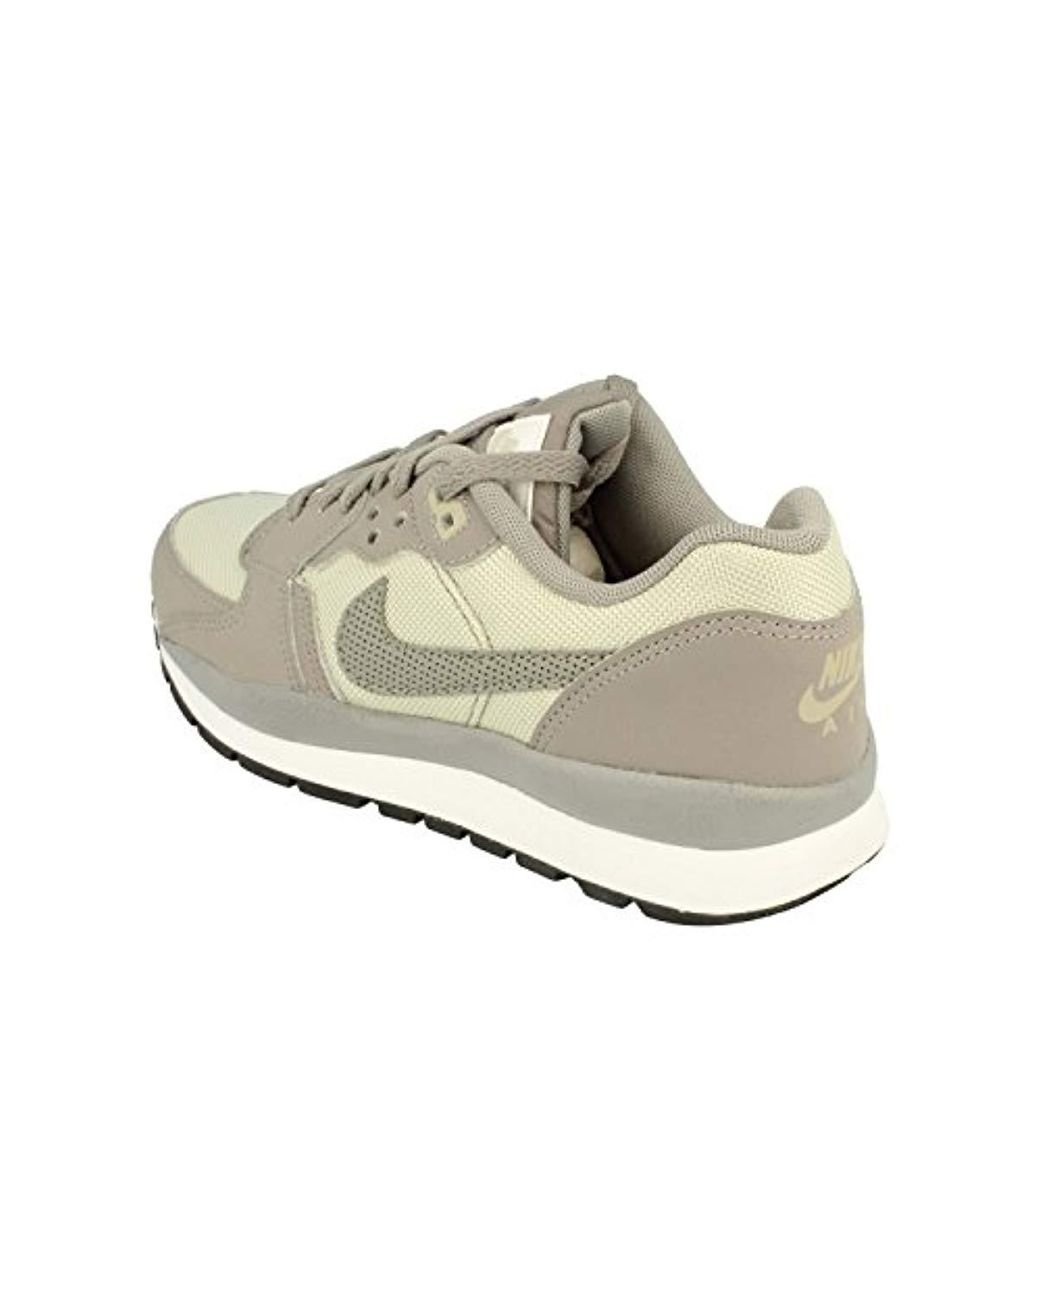 Nike Air Windrunner Tr 2 Gs Running Trainers 448423 Sneakers Shoes | Lyst UK